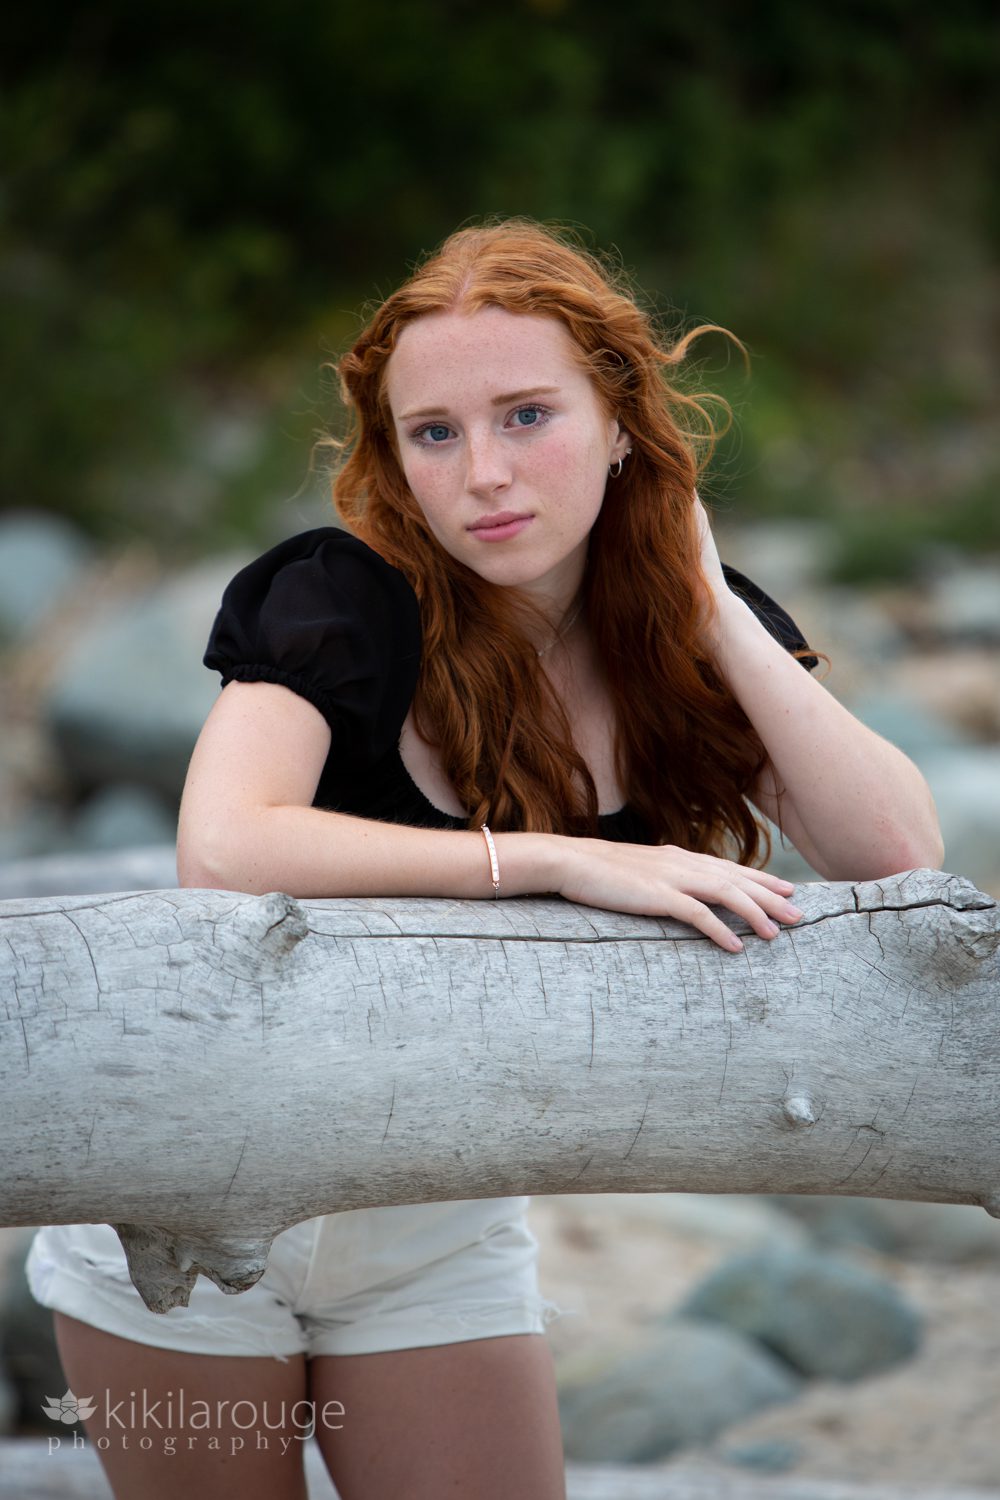 Girl with red hair and black top white shorts leaning on beach driftwood serious face